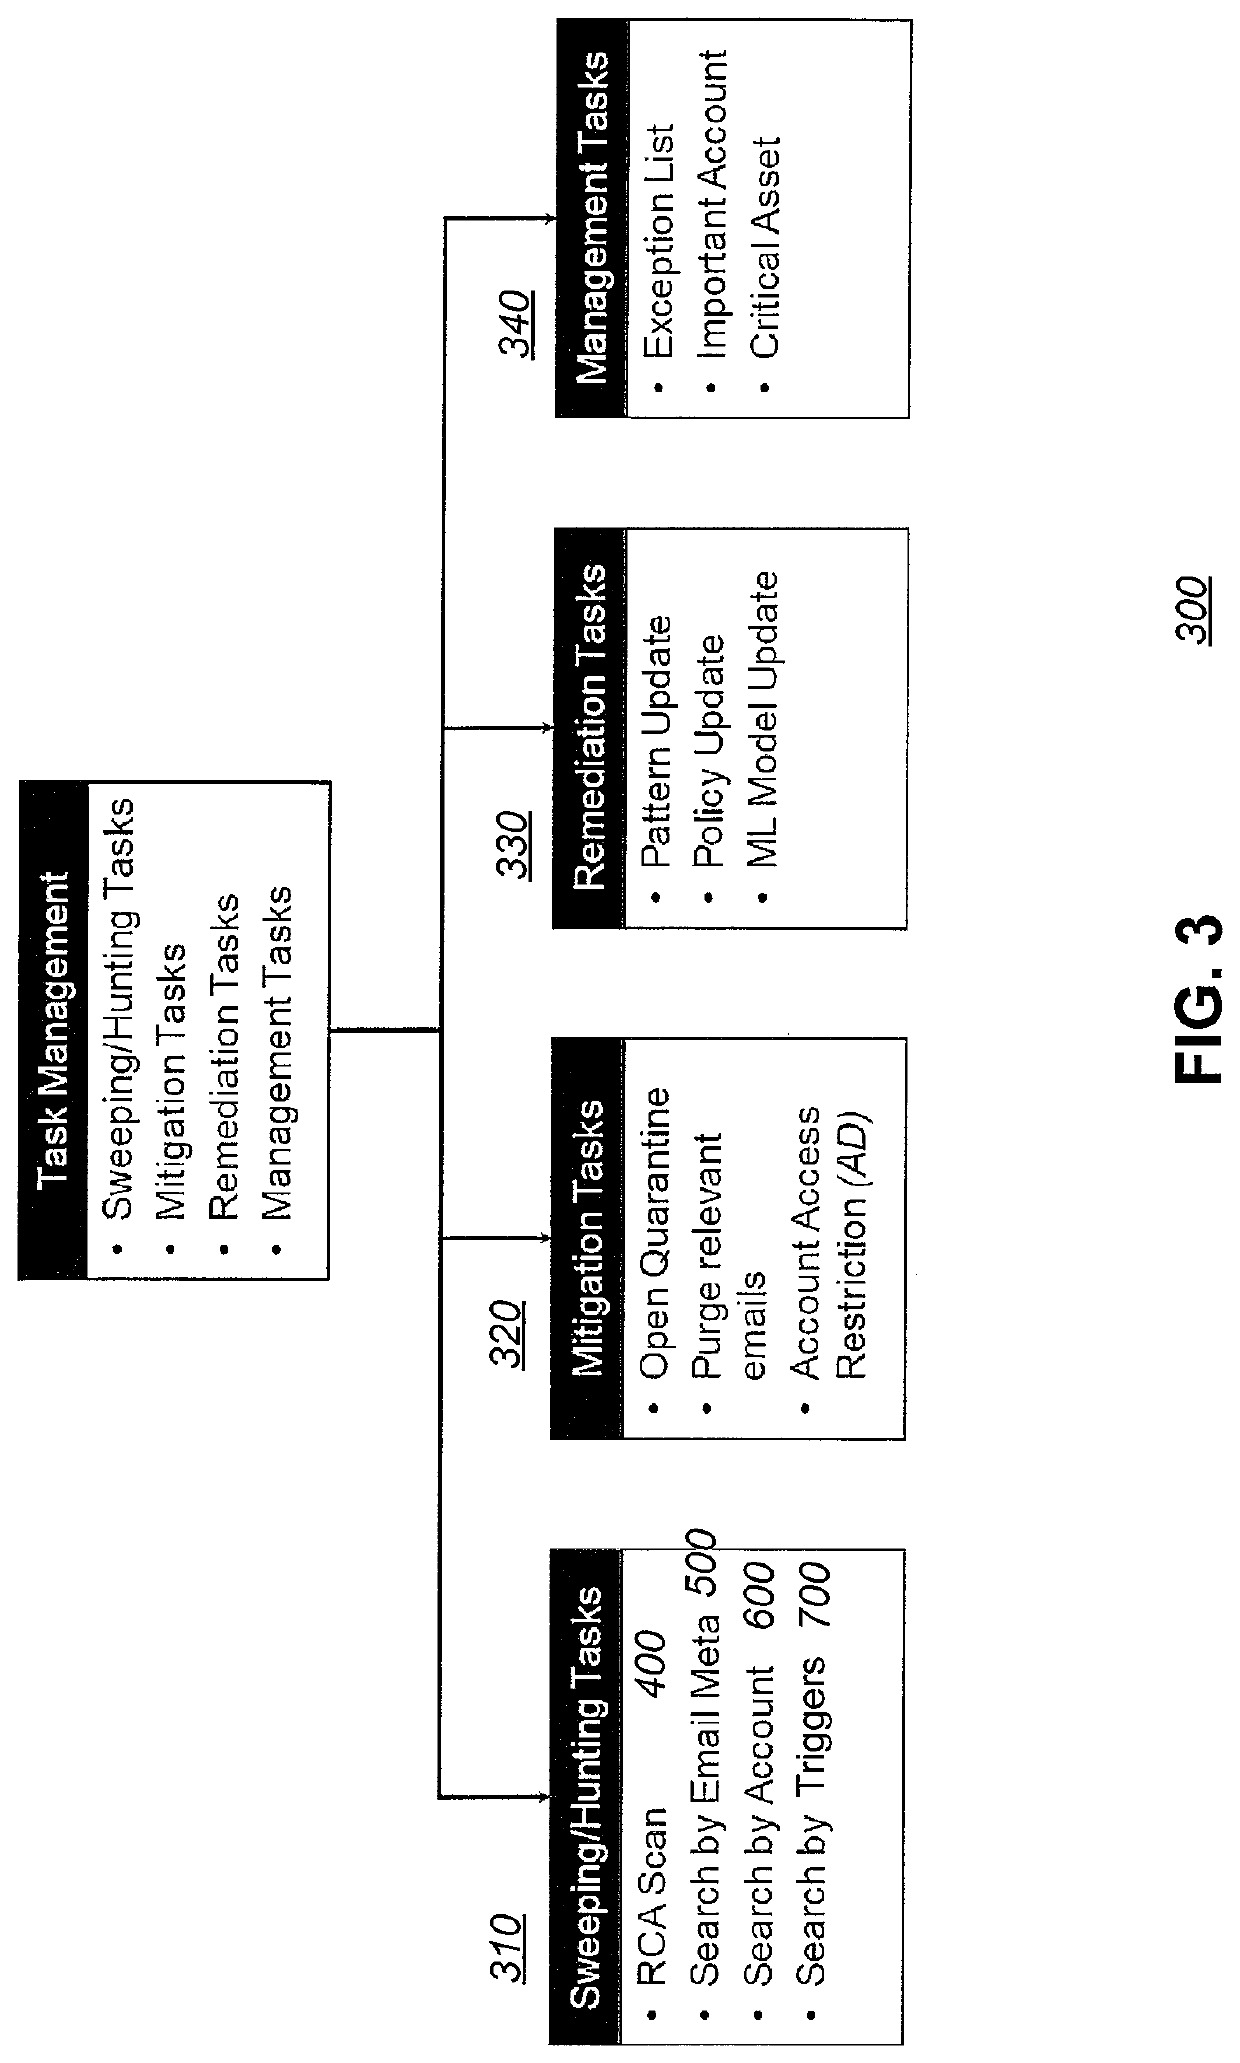 Systems and methods for detecting and responding to anomalous messaging and compromised accounts